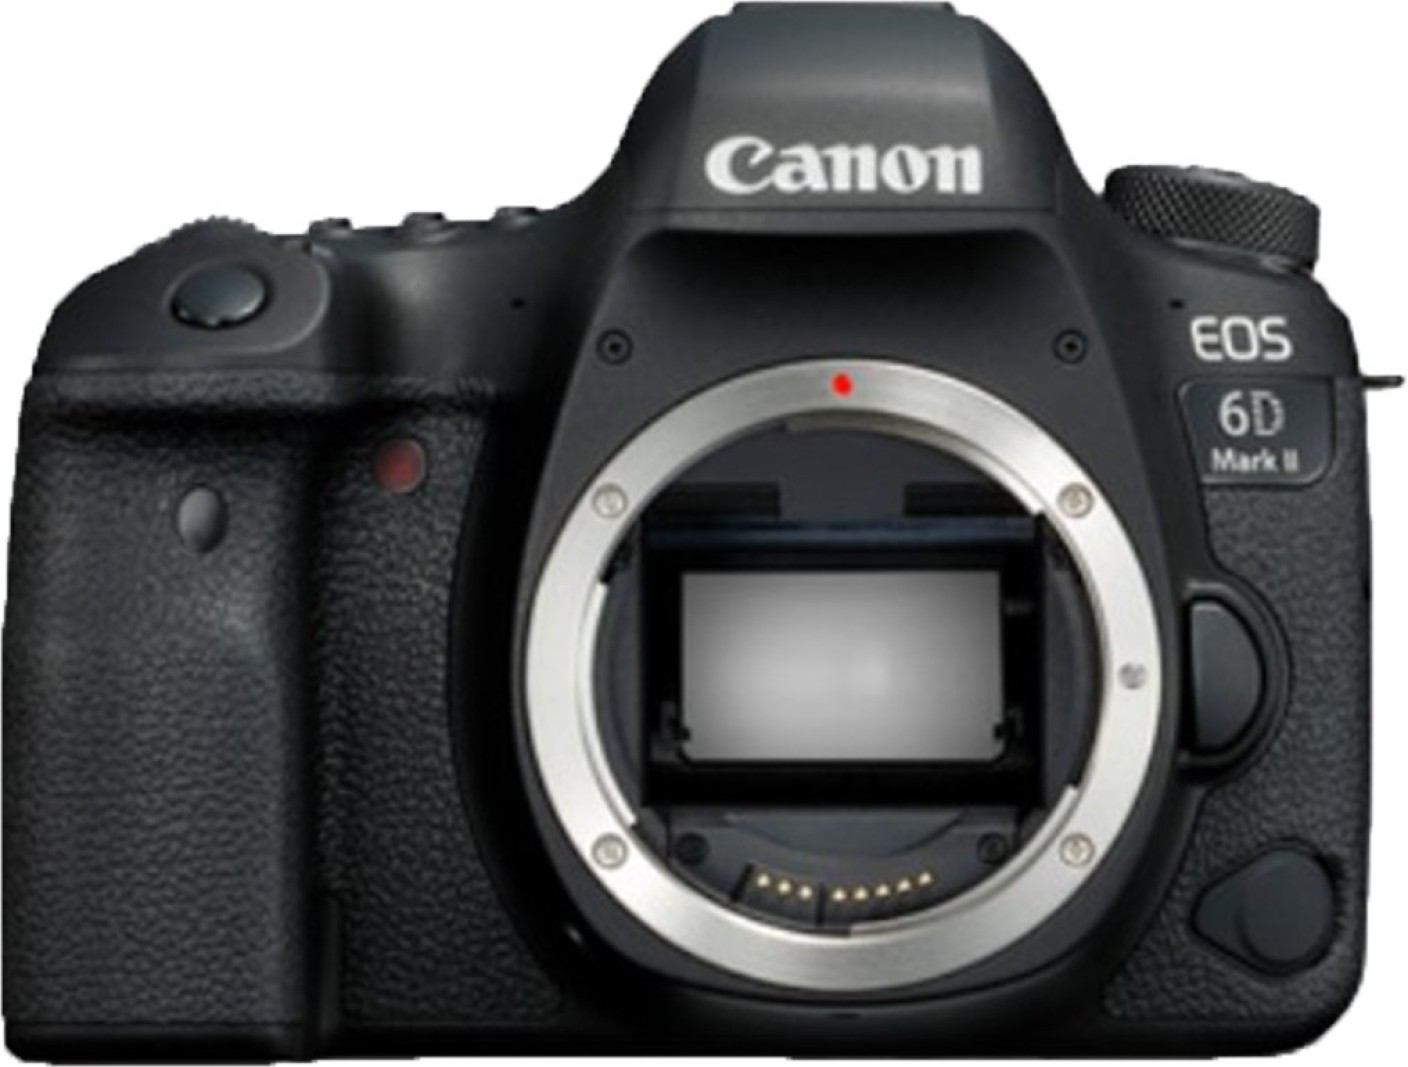  Canon  EOS  6D  Mark II DSLR Camera Body Only Price in 